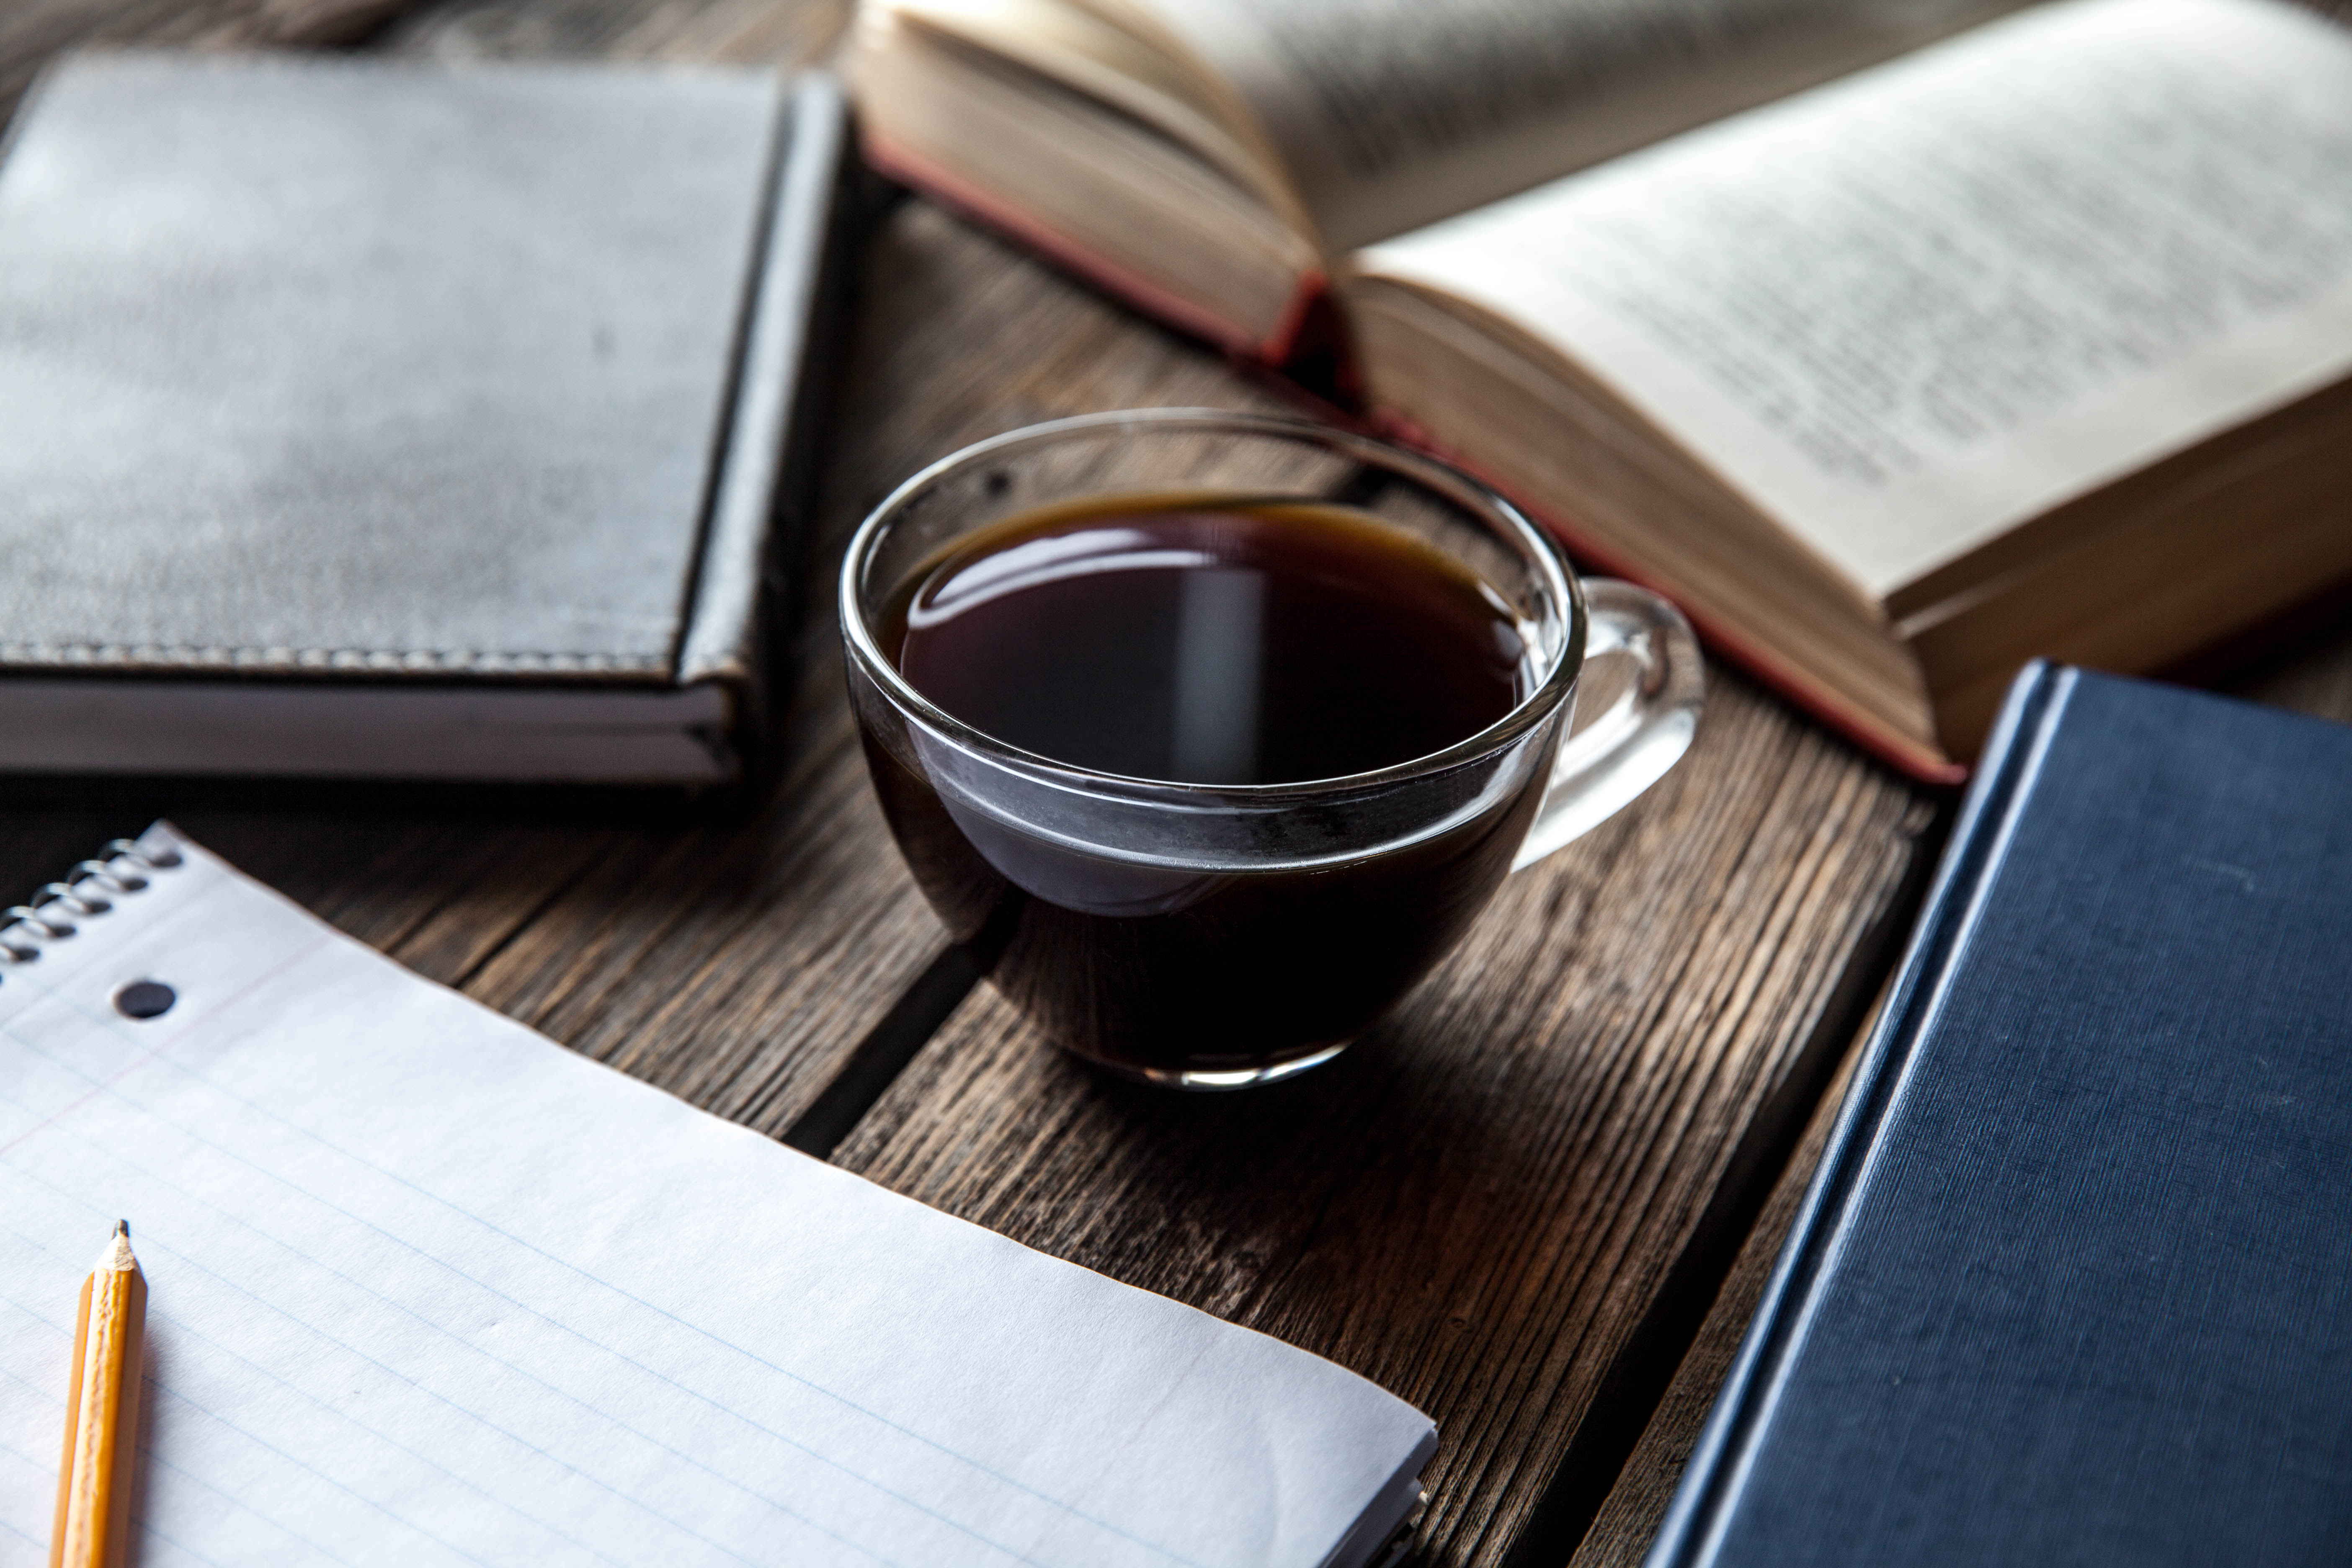 Cup of coffee on a table with books surrounding